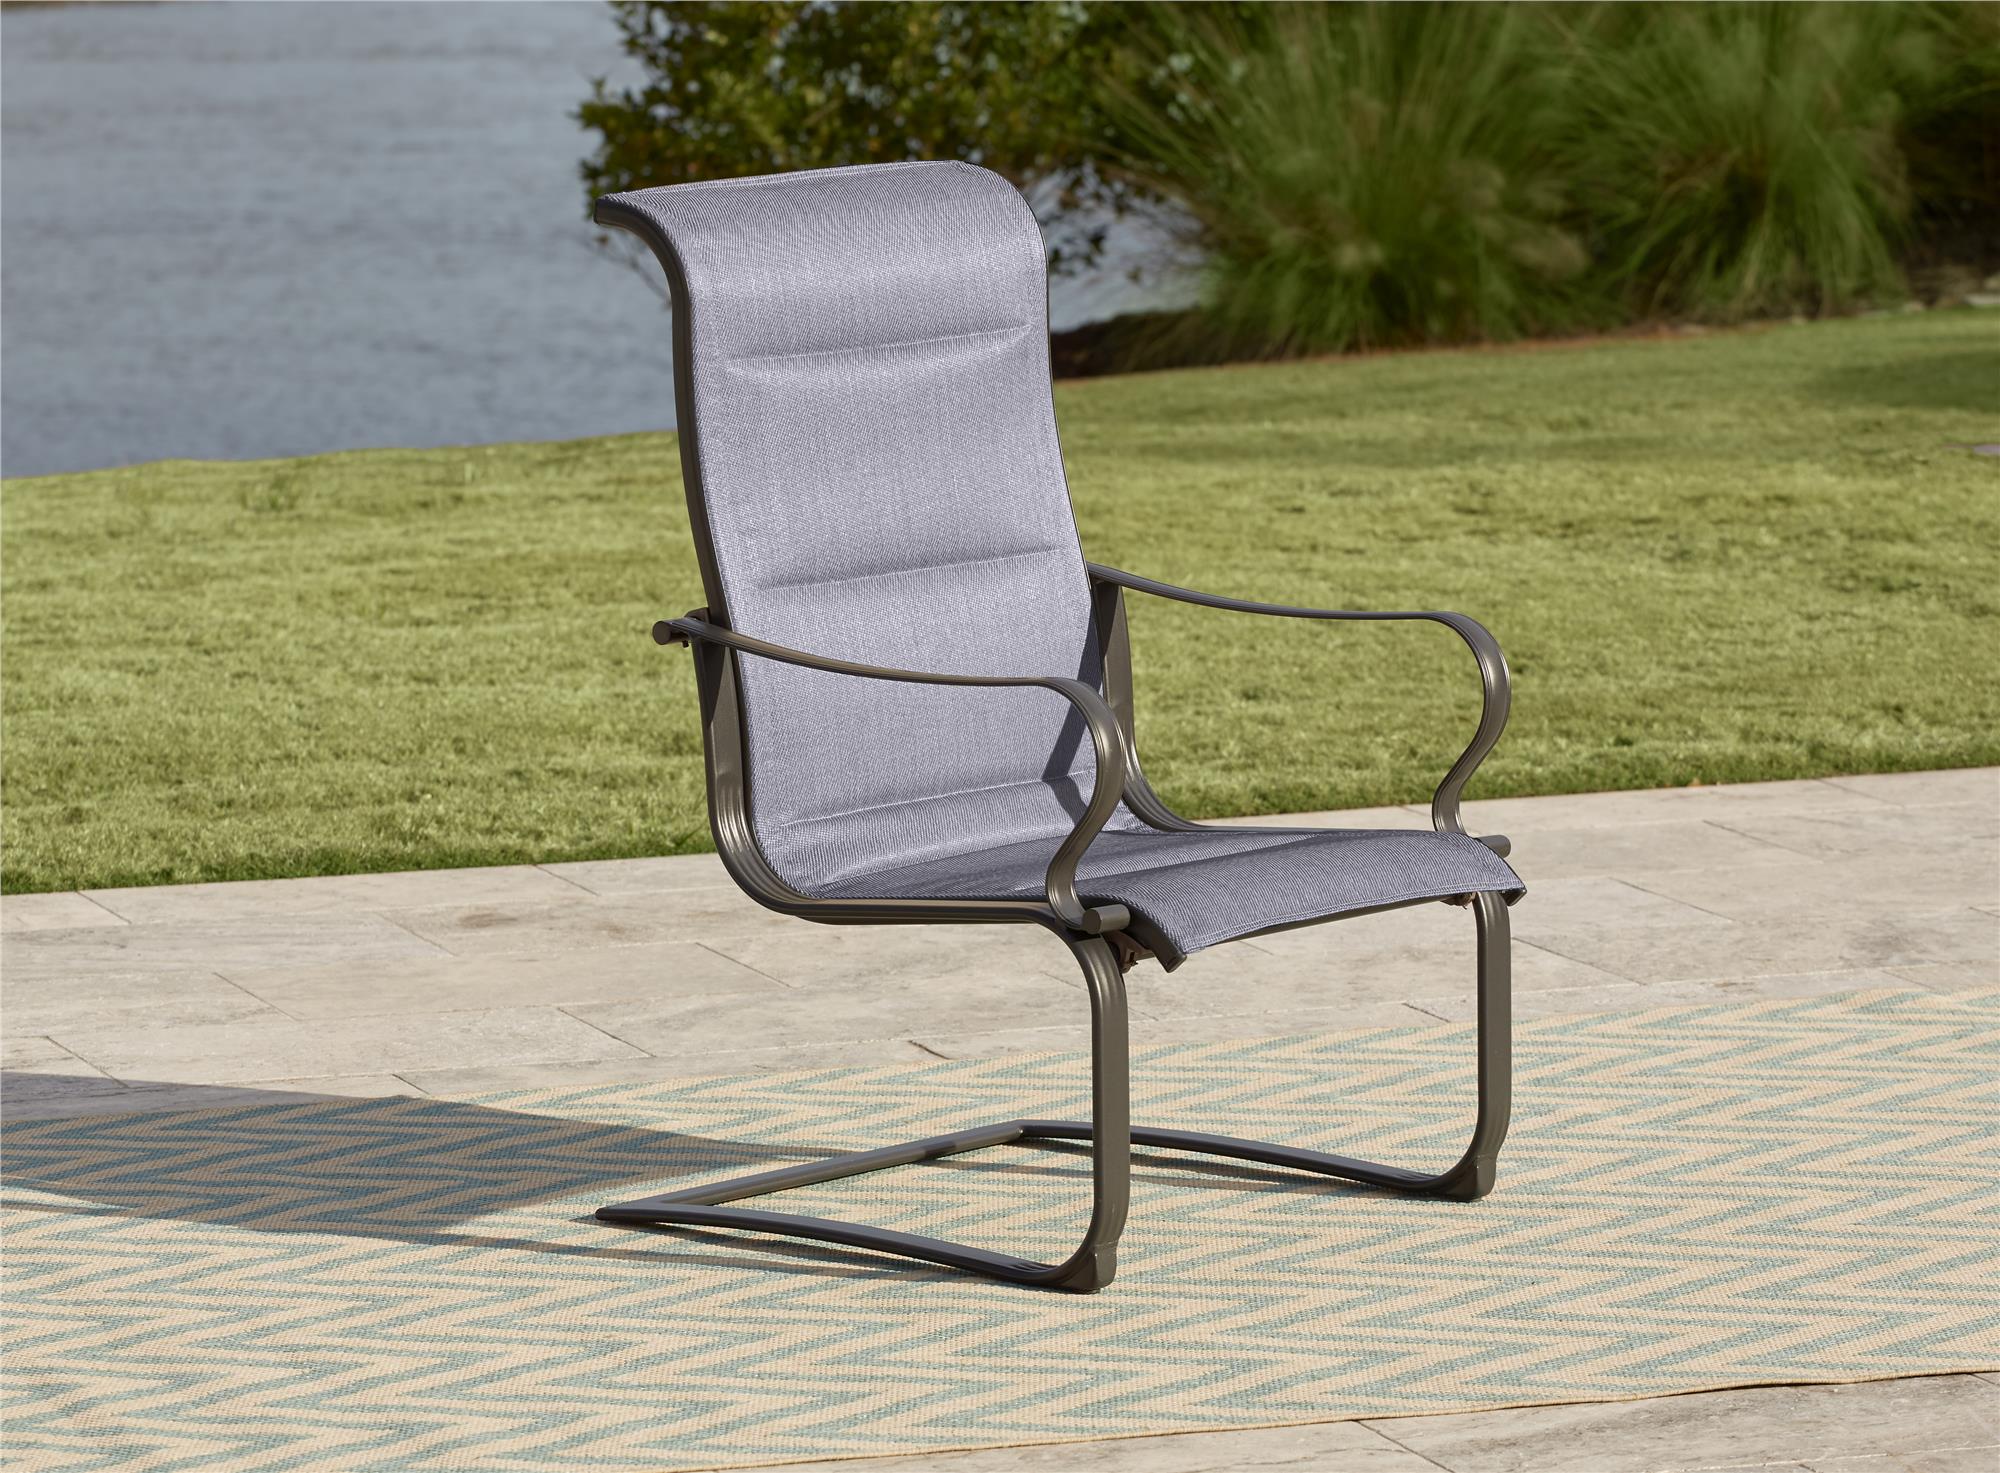 COSCO Outdoor Living 5 Piece SmartConnect Dining Set with Padded Motion Chairs, Gray Frame, Gray Fabric - image 3 of 23